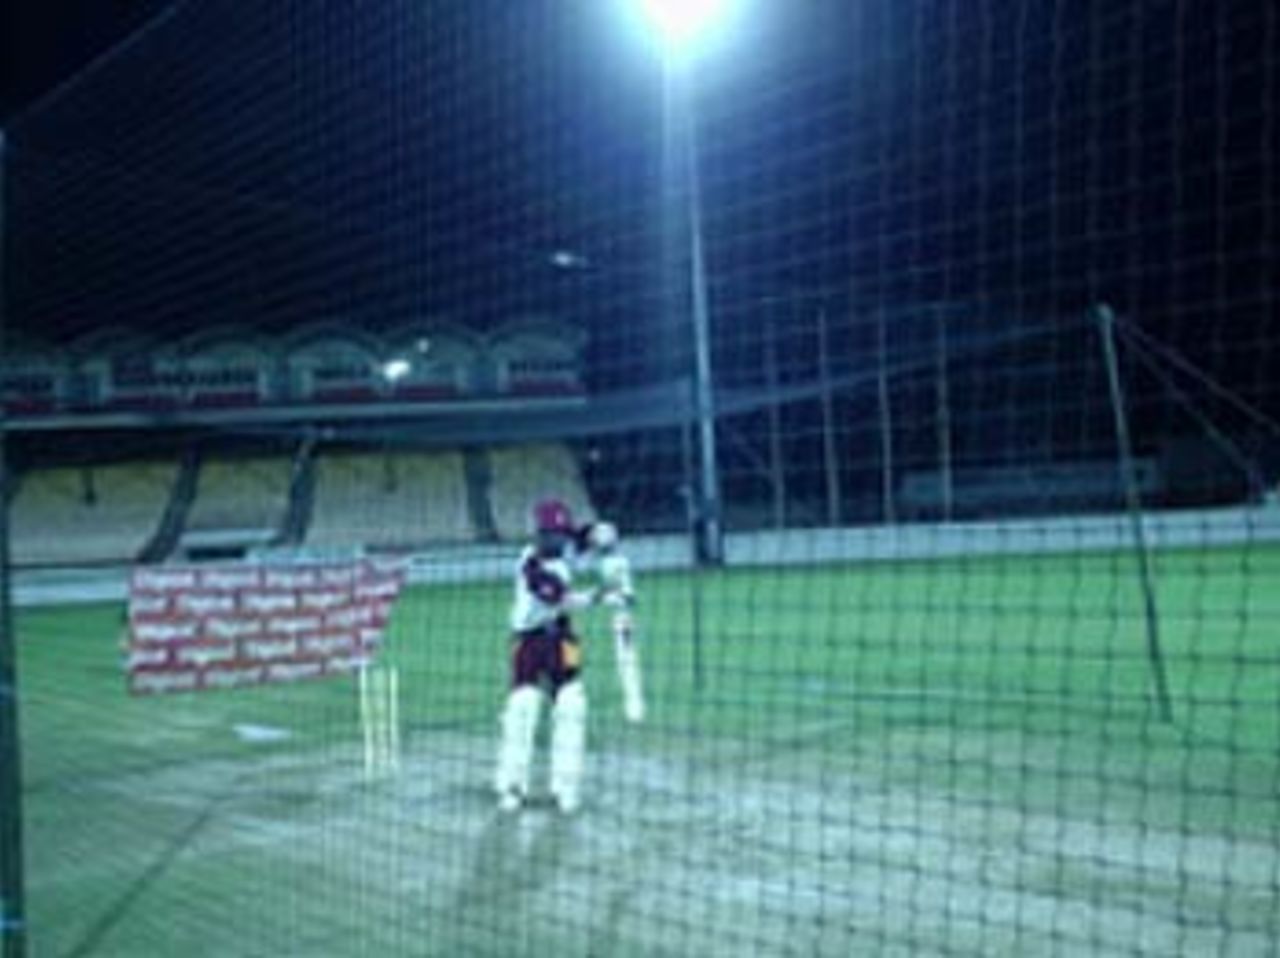 The lights take full effect at St Lucia during a practice session, Beausejour Stadium, St Lucia, March 9 2006